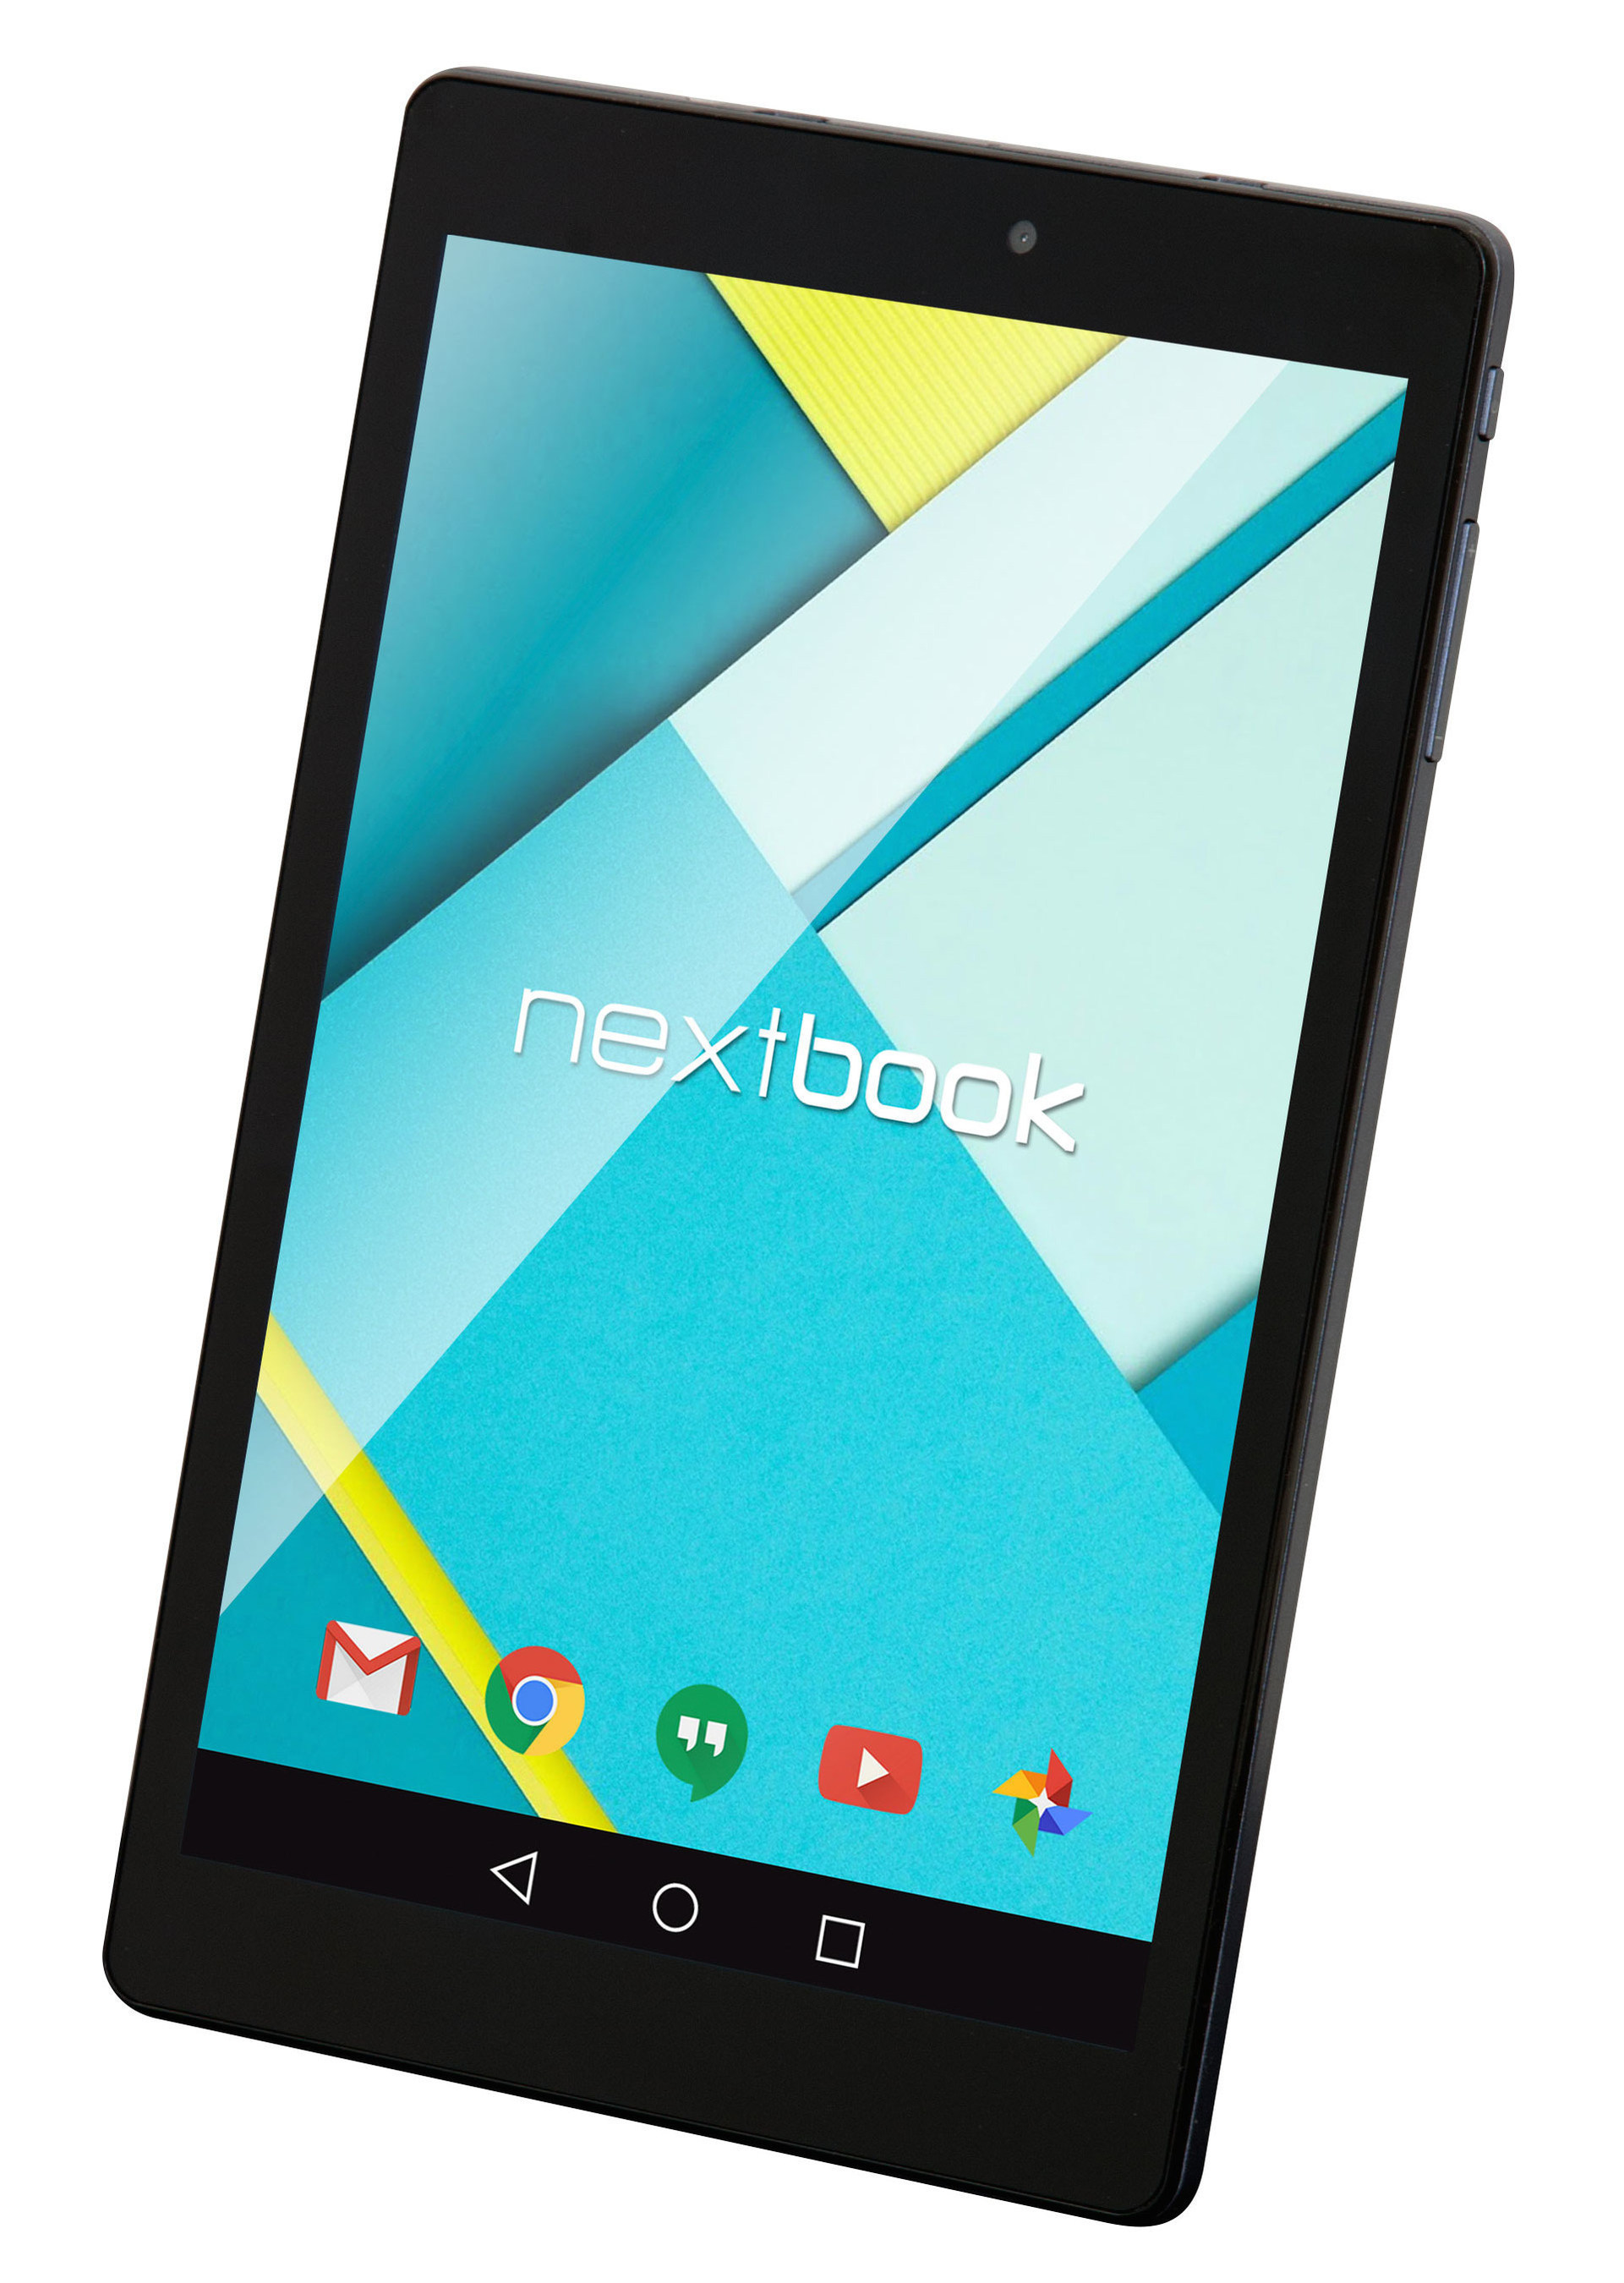 The new Nextbook Ares 8 Android tablet is available at Walmart for $78 in black, red or blue.